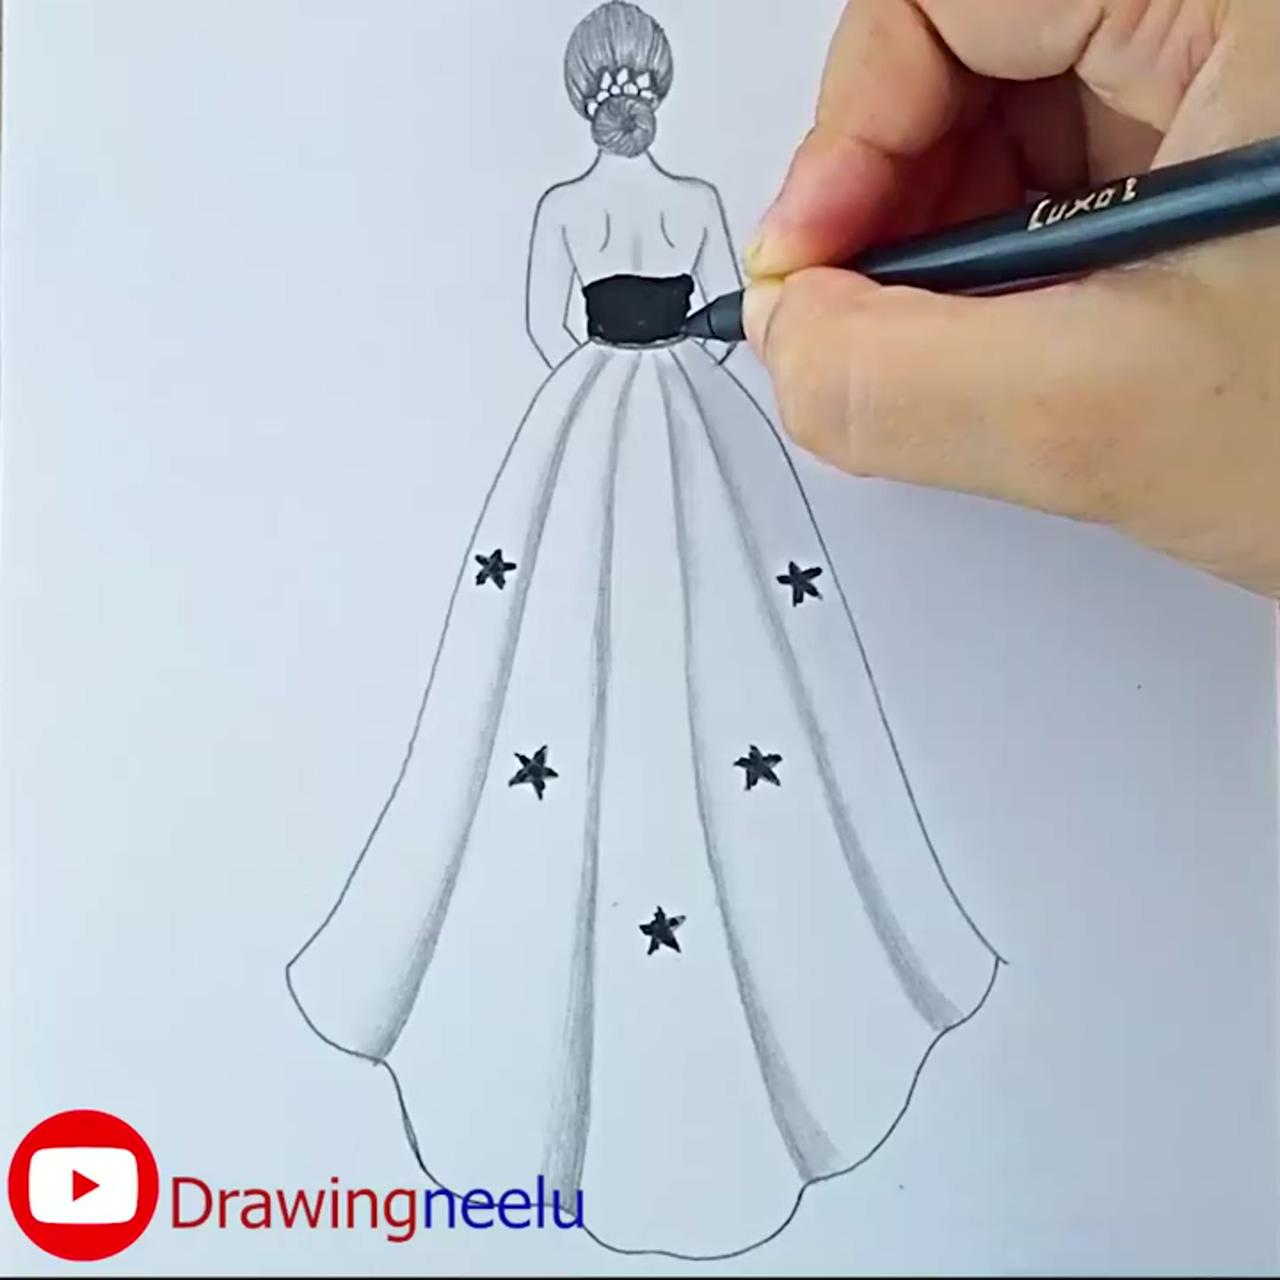 How to draw a girl beautiful dress - step by step drawing, beginner drawing tutorial, easy drawing; pencil drawings of girls